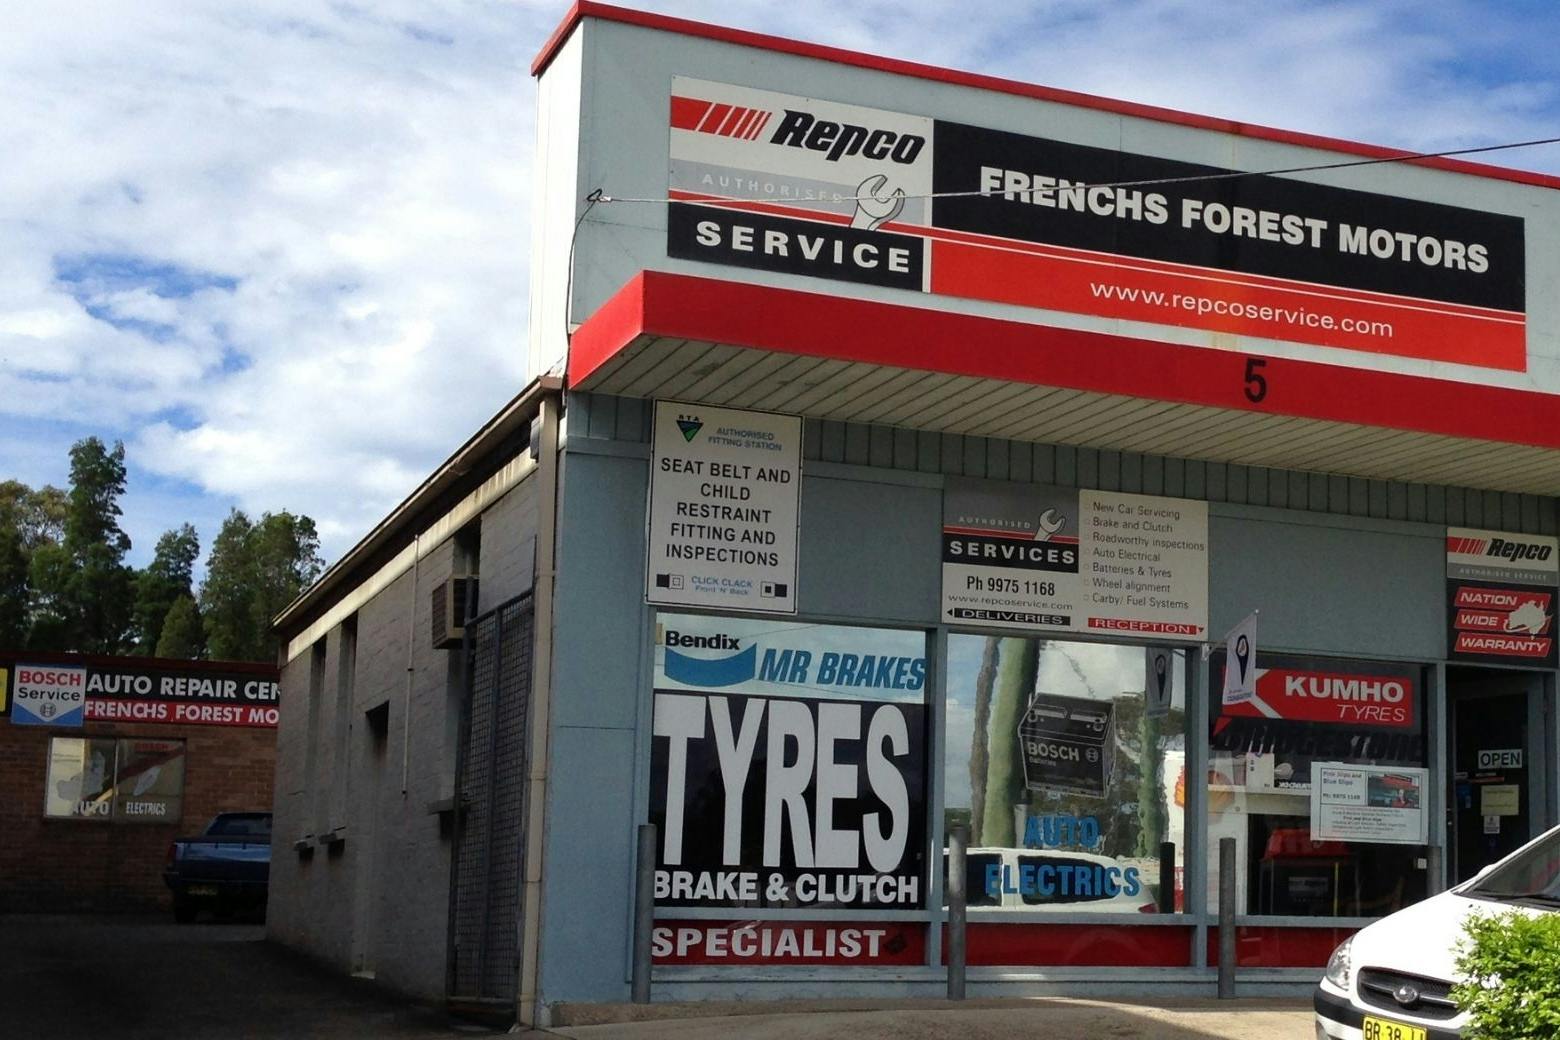 Frenchs Forest Motors profile photo